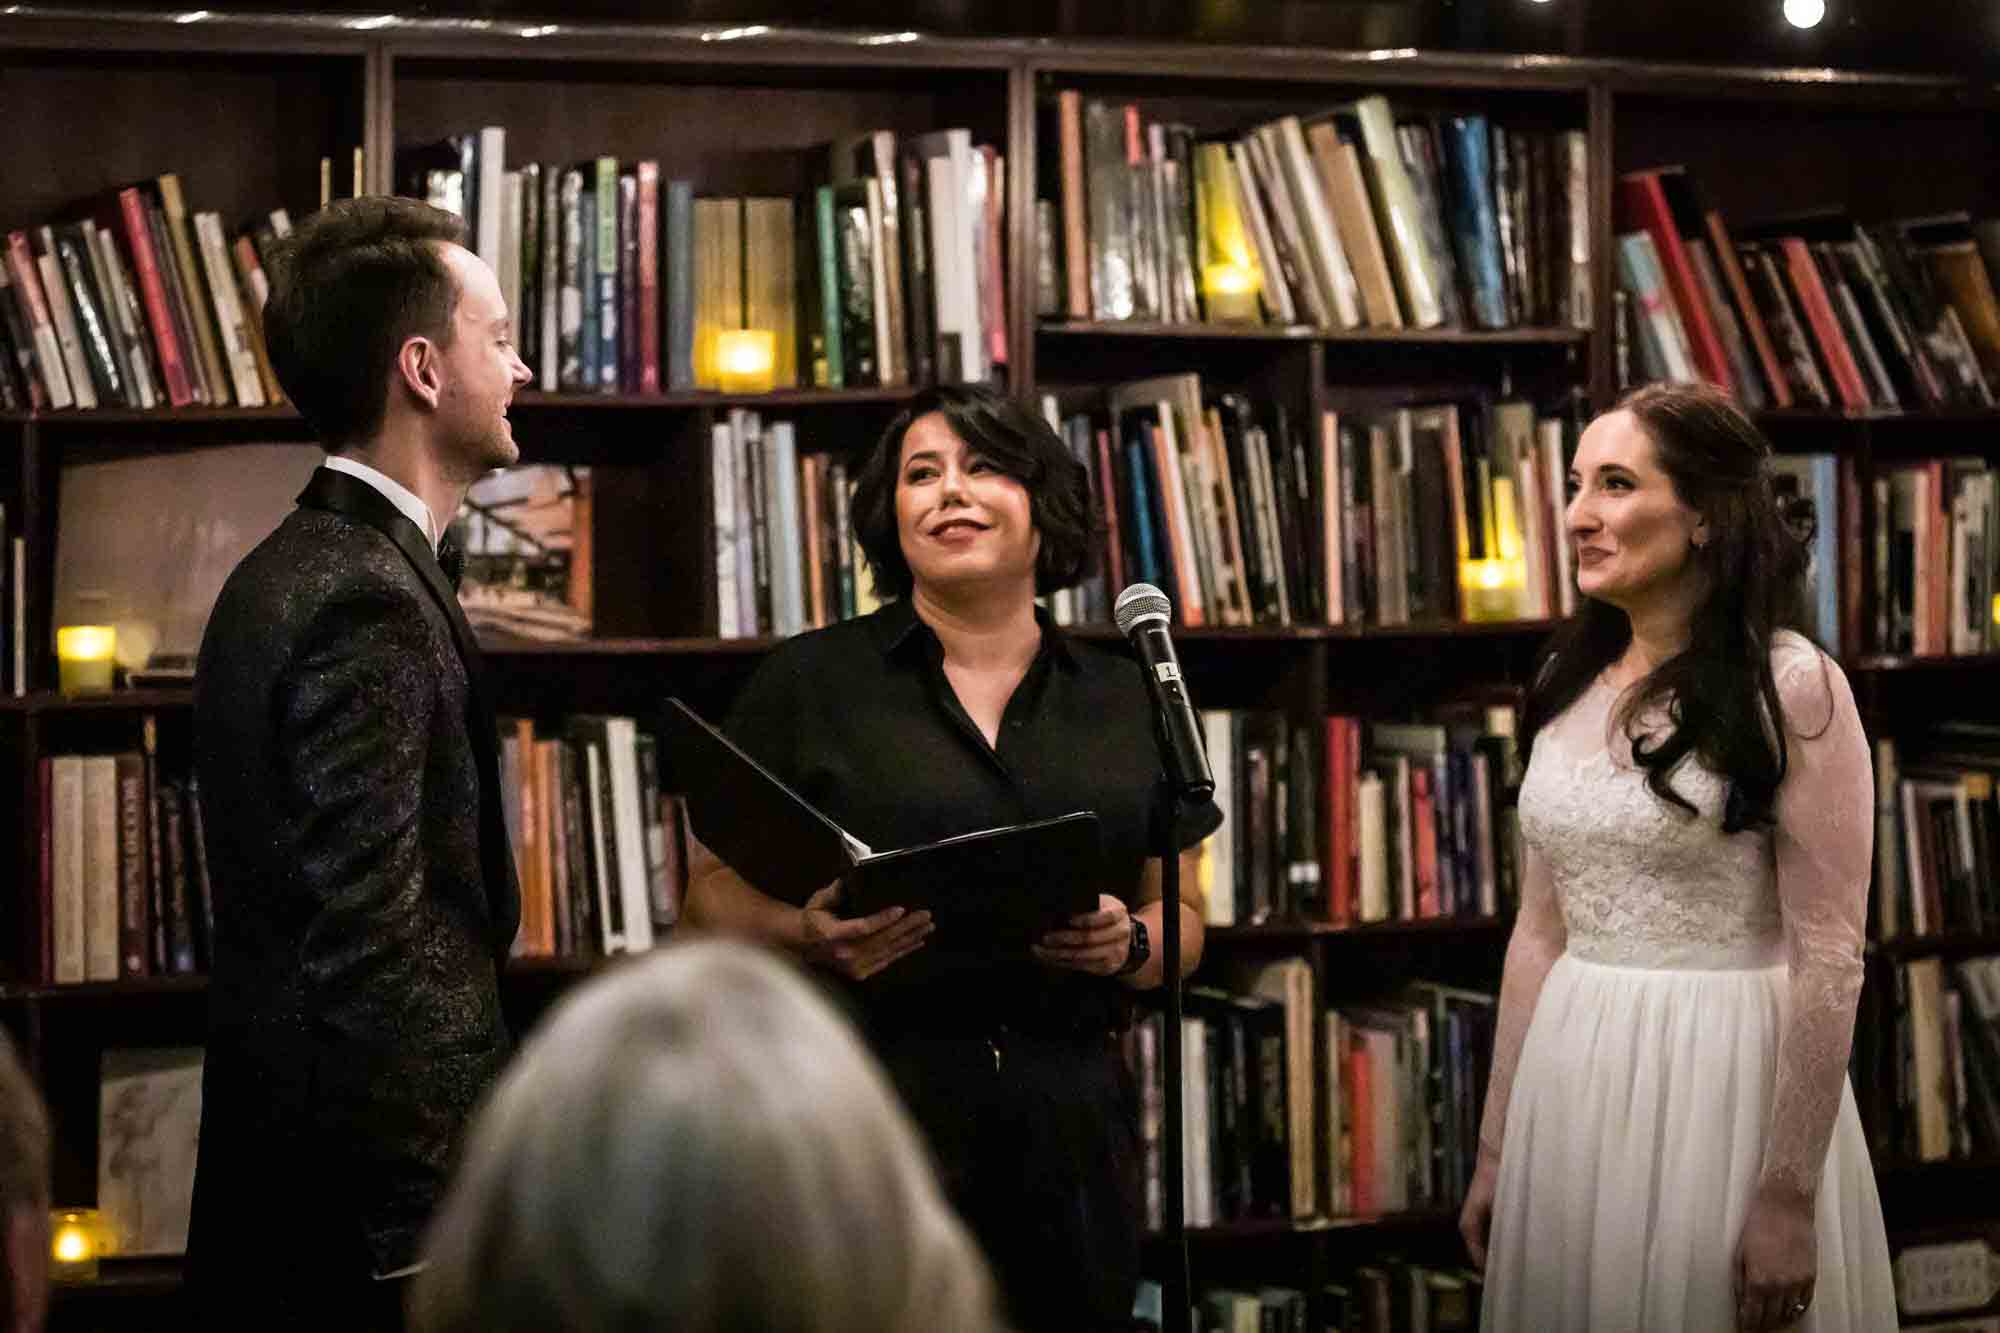 Bride and groom standing with officiant in bookstore for an article on wedding ceremony photo tips